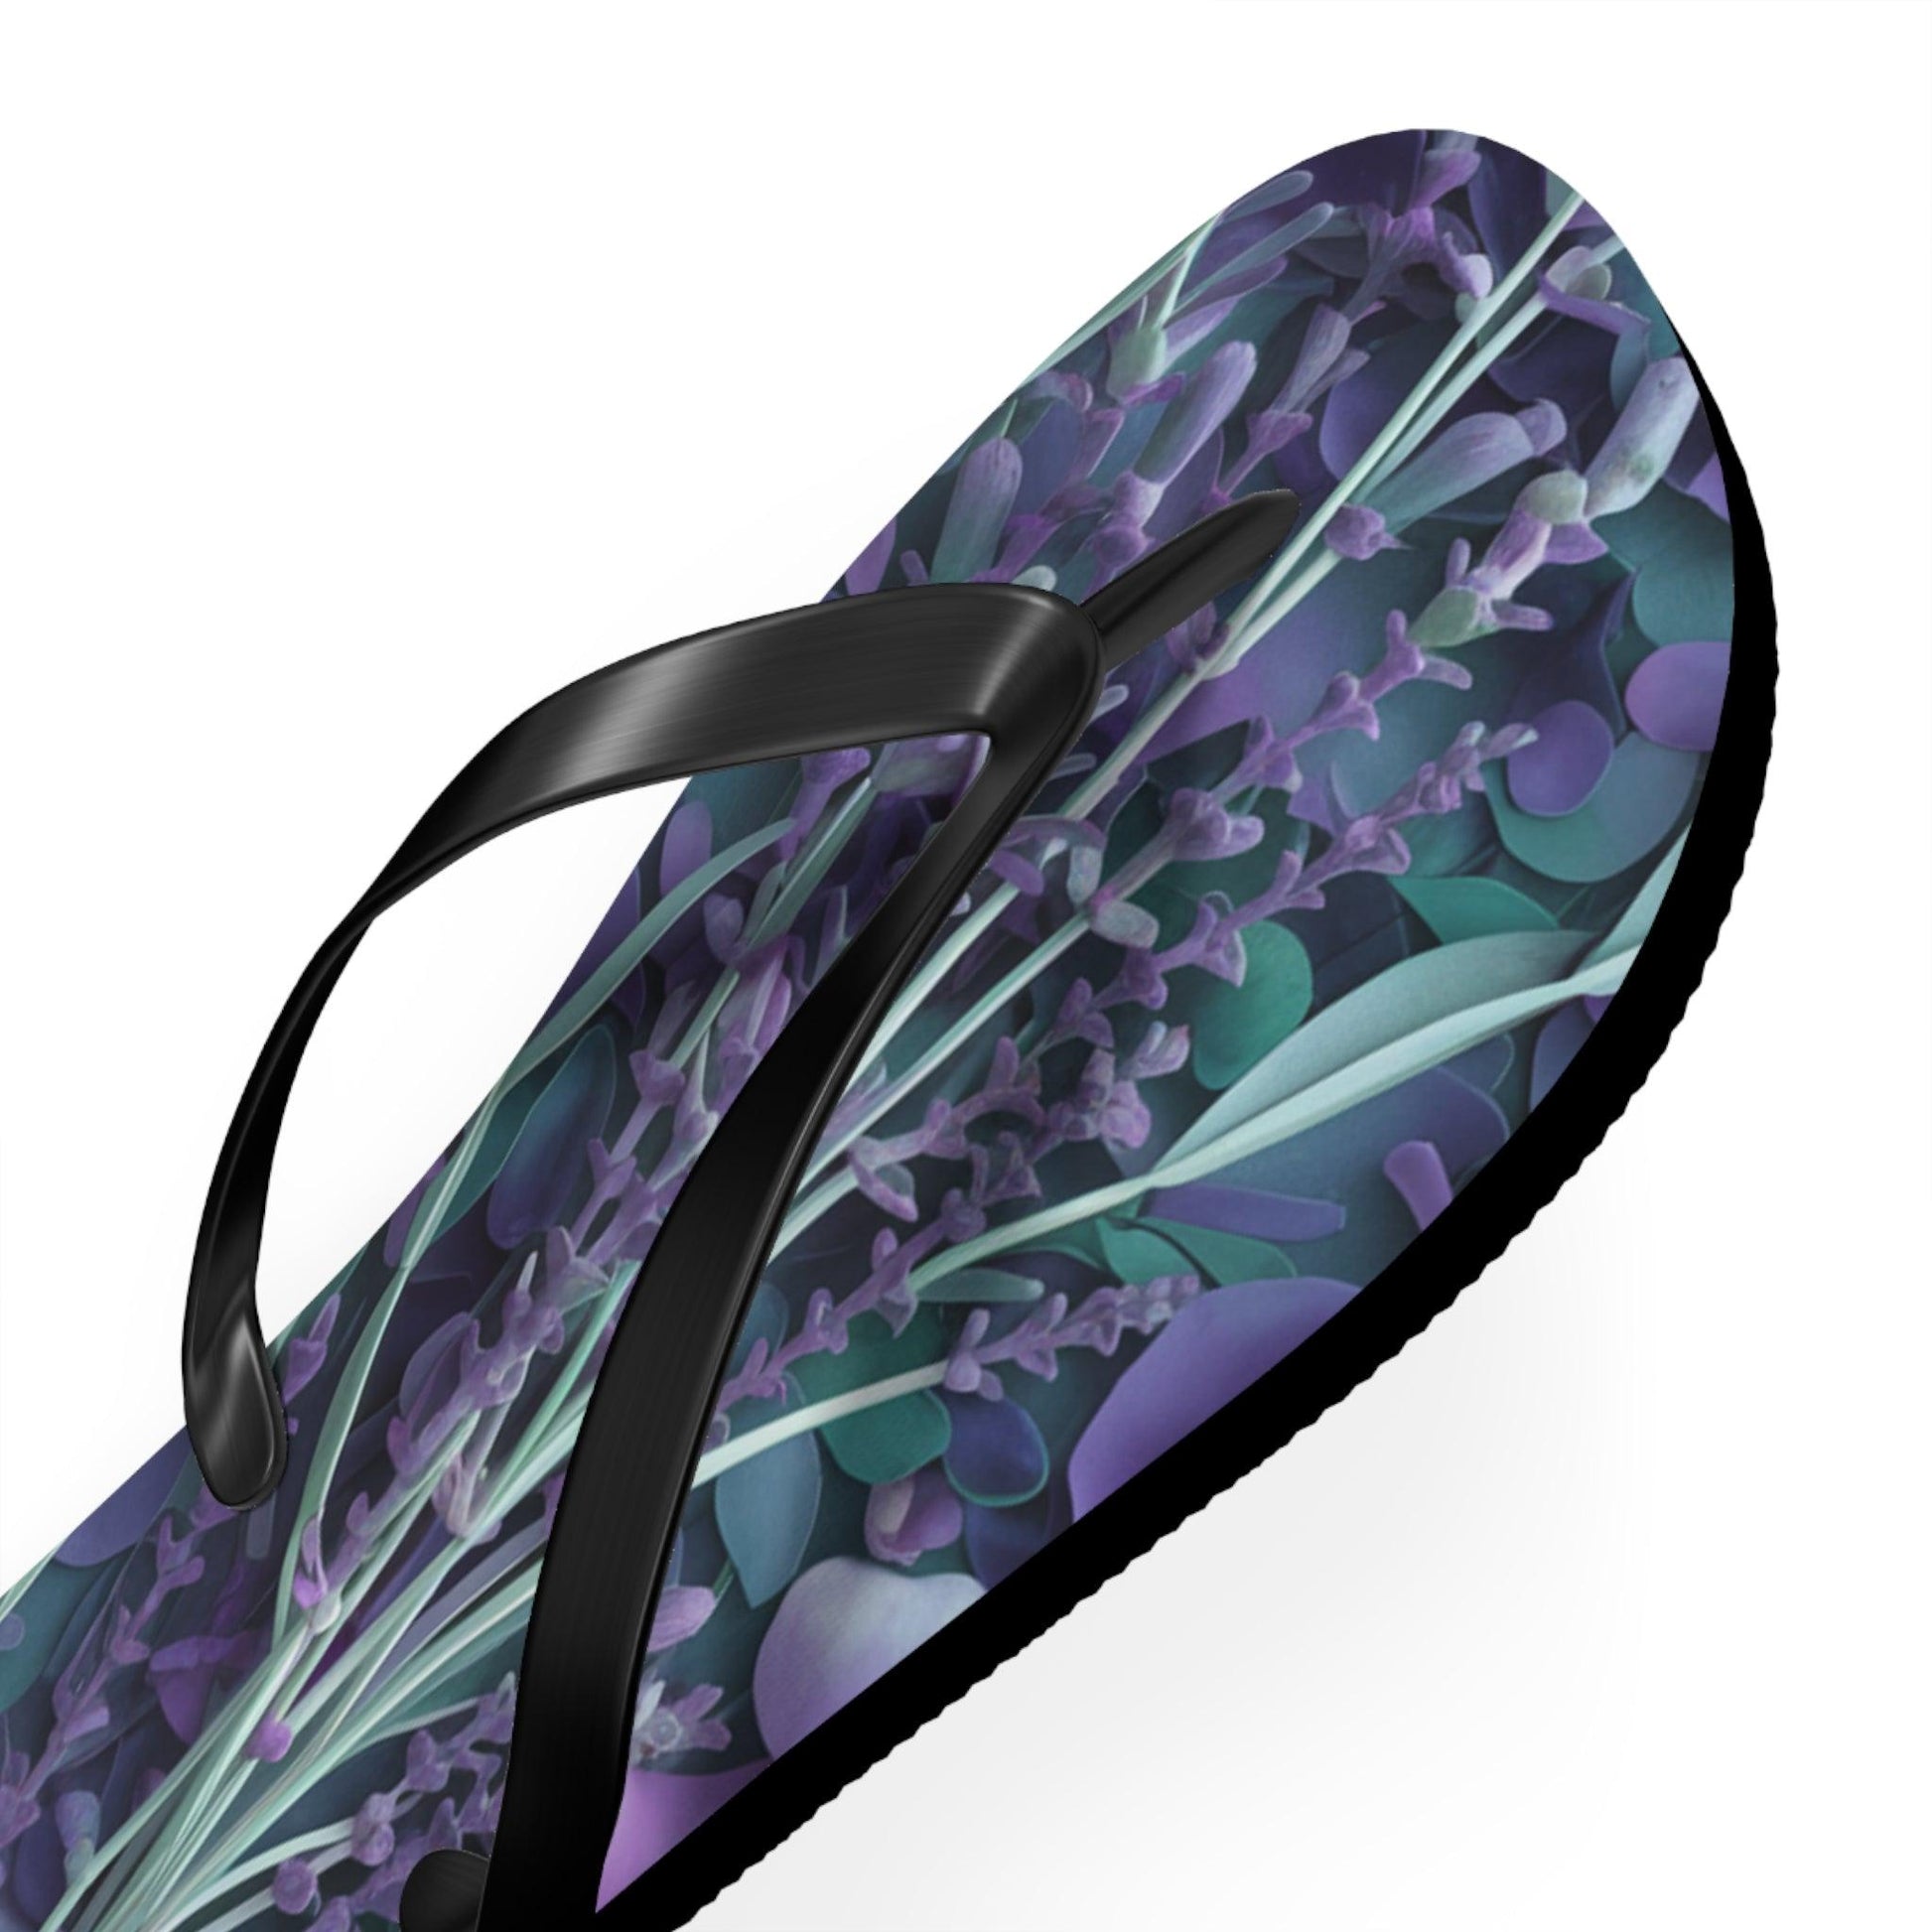 Lavendar Inspired Flip Flops, Express Your Beach Loving Self - Coastal Collections